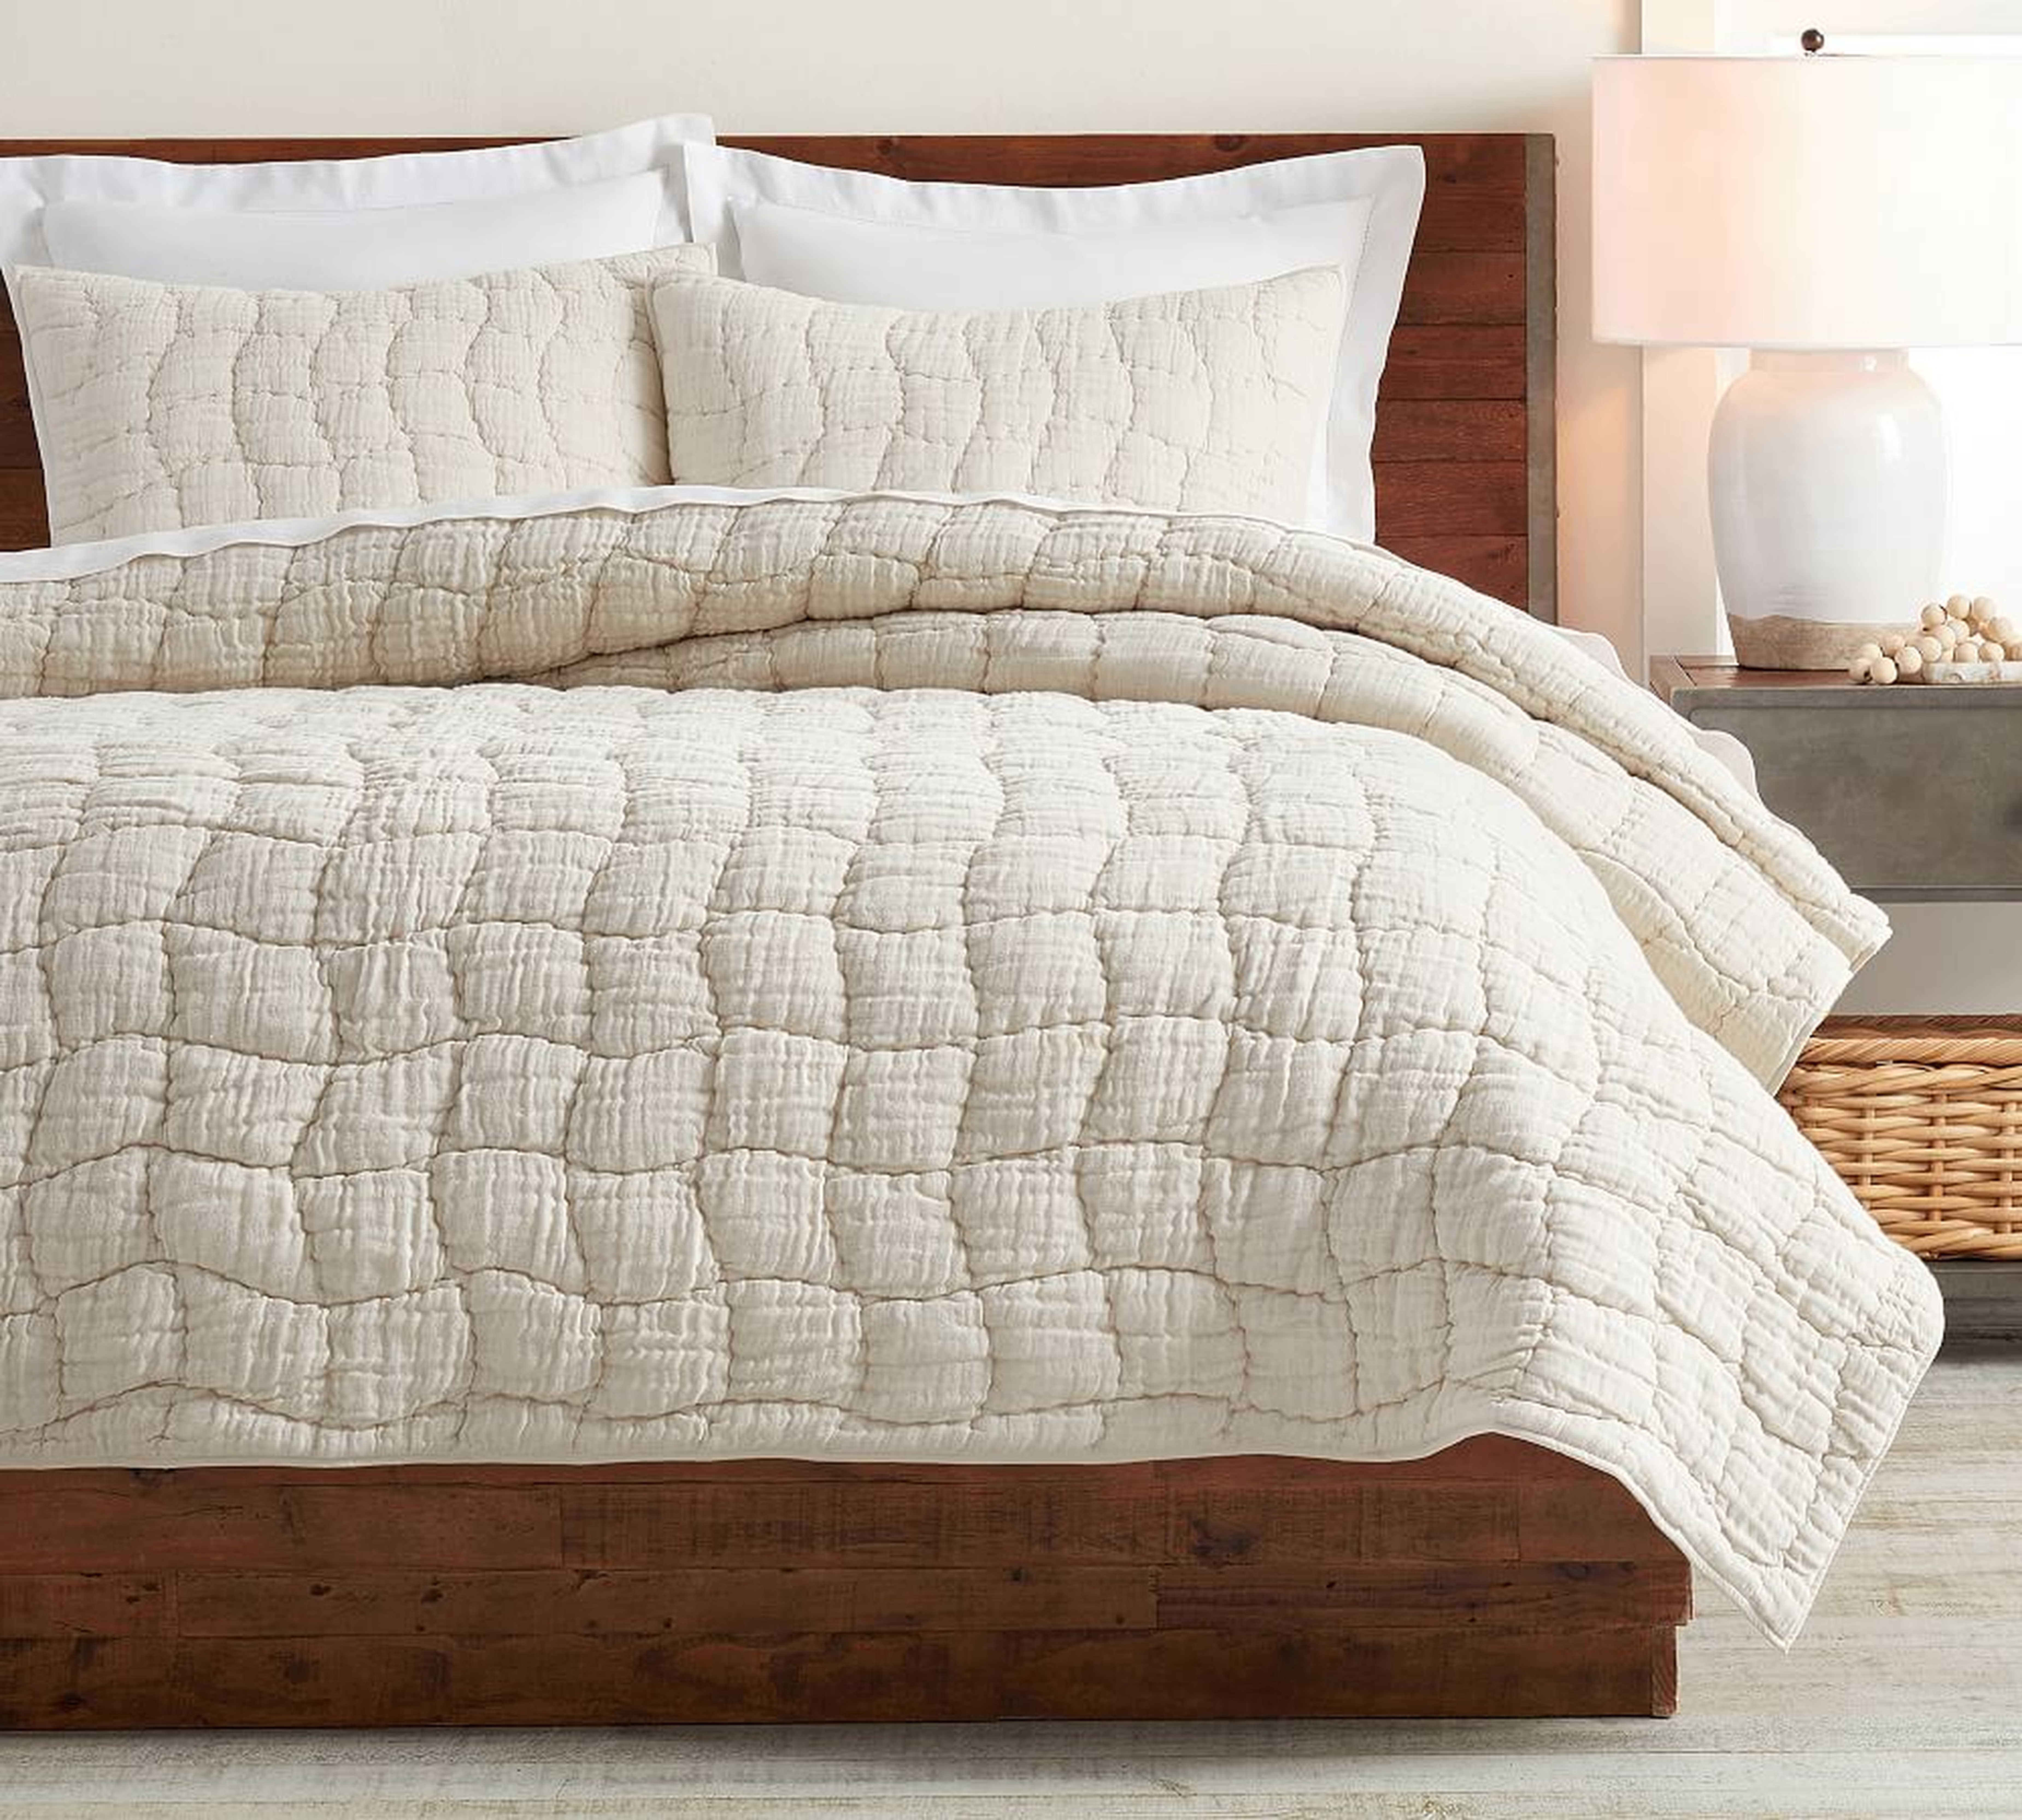 Flax Cloud Hancrafted Linen/Cotton Quilt, Full/Queen - Pottery Barn